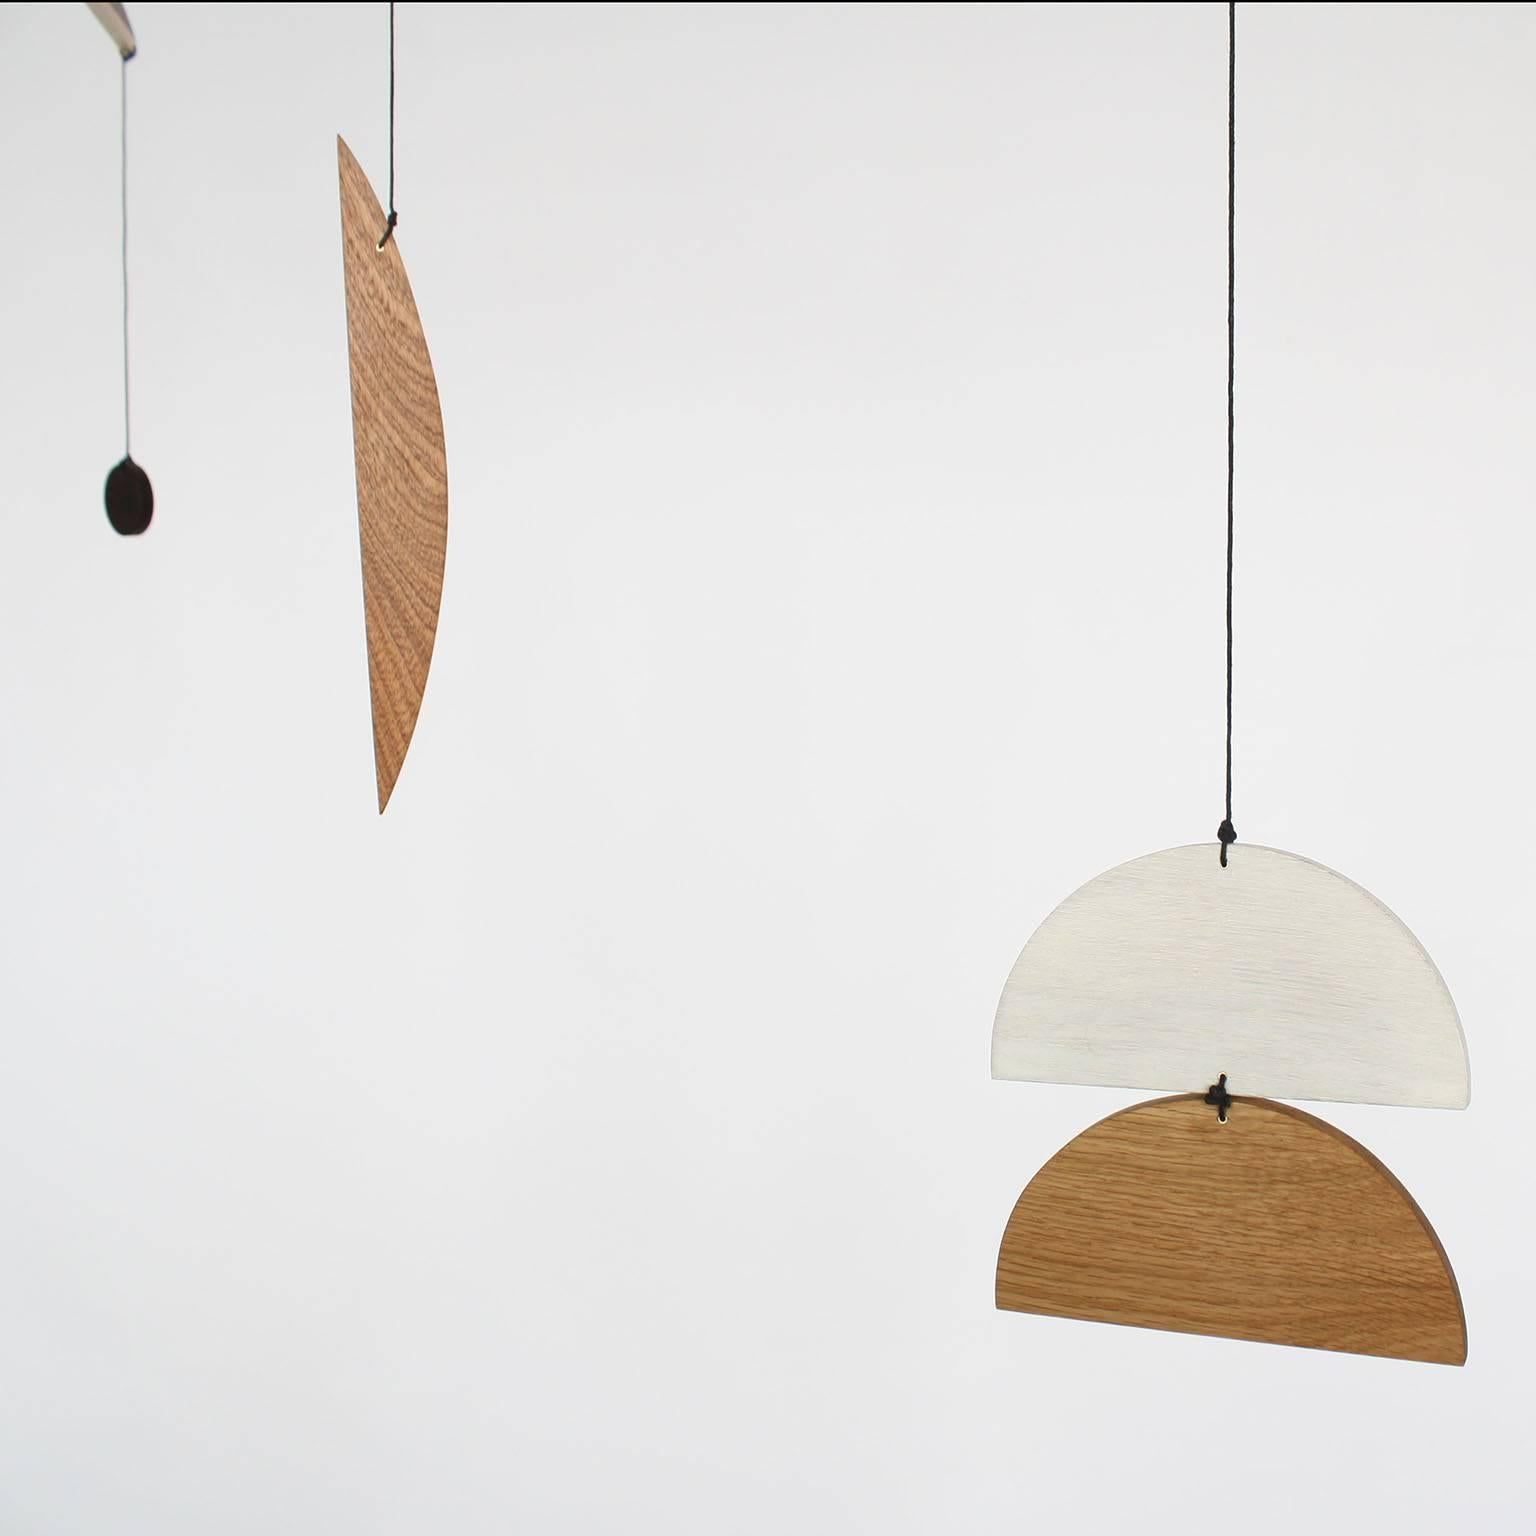 Fort Makers' Circle 1 Mobile is made in Brooklyn by Noah Spencer. His wooden kinetic sculptures explore organic and linear form and touch upon a human fascination with the universe.

Materials: pine, white oak, maple, sapele, wenge, wax string with